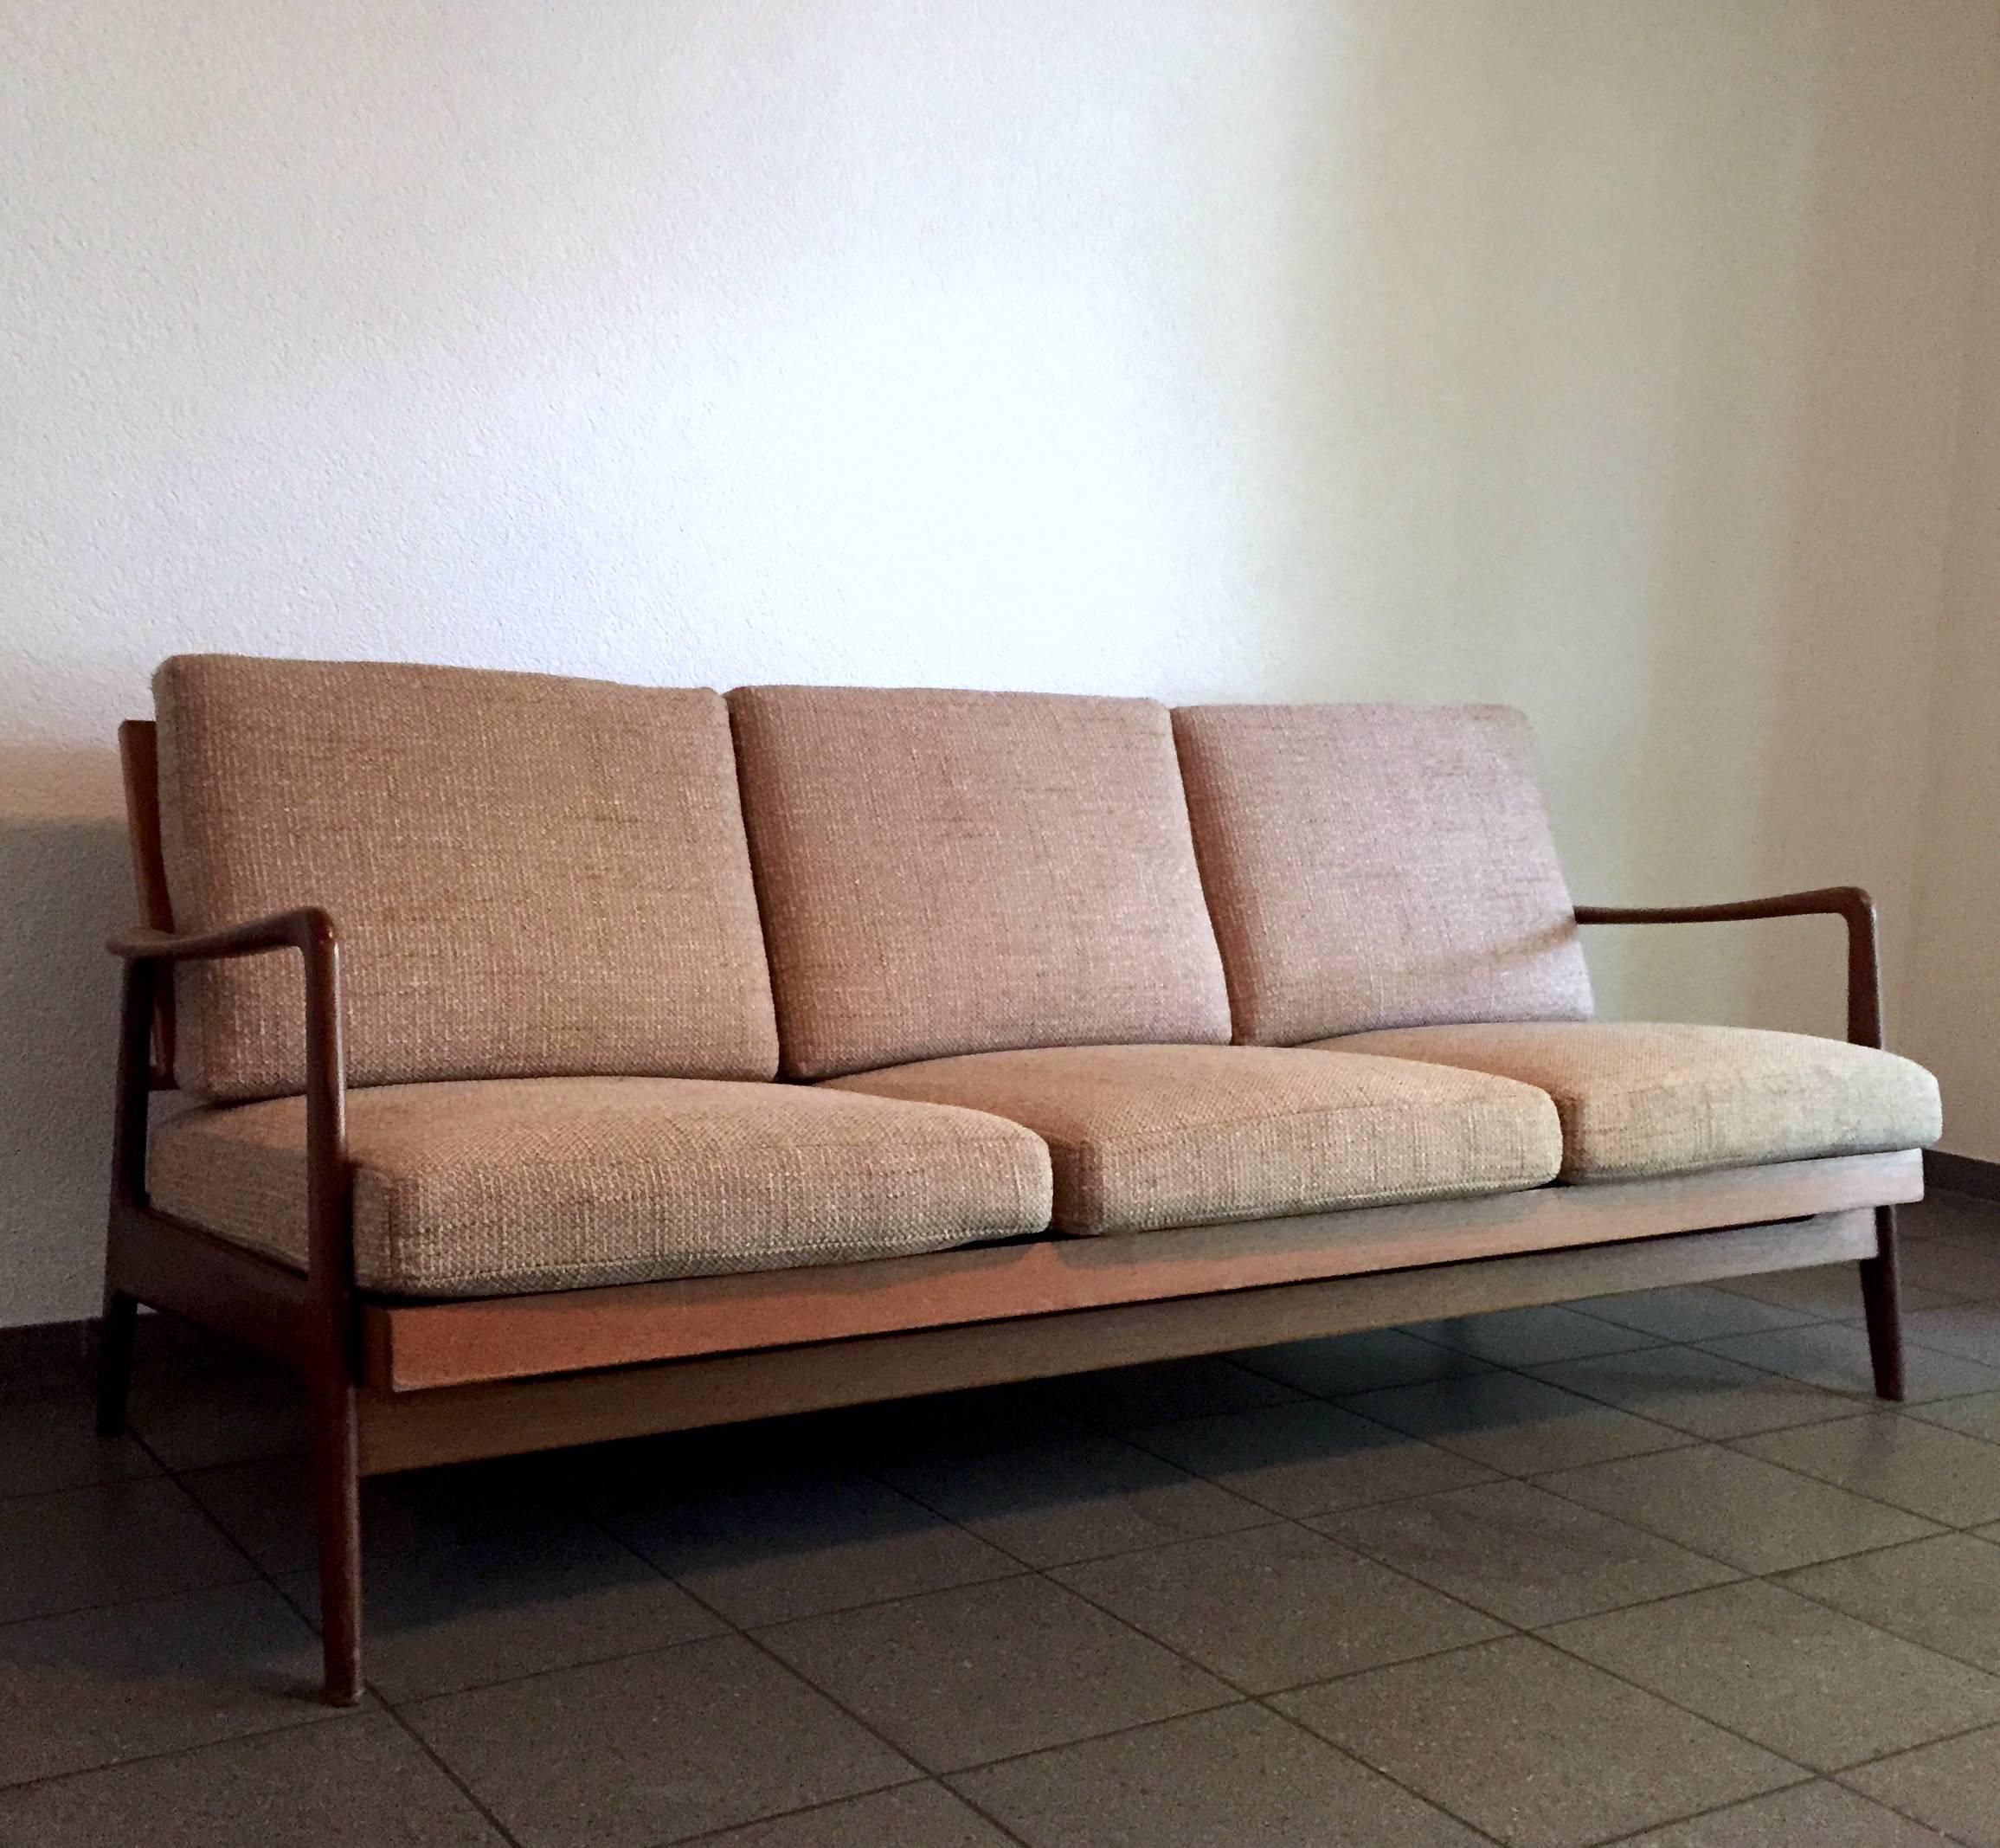 A typical Danish design from the 1960s: this solid teak sofa, can be transformed into a daybed if you slide the mattress a bit forward. It was manufactured in Denmark. The design features a delicate and organically shaped frame with rounded edges.